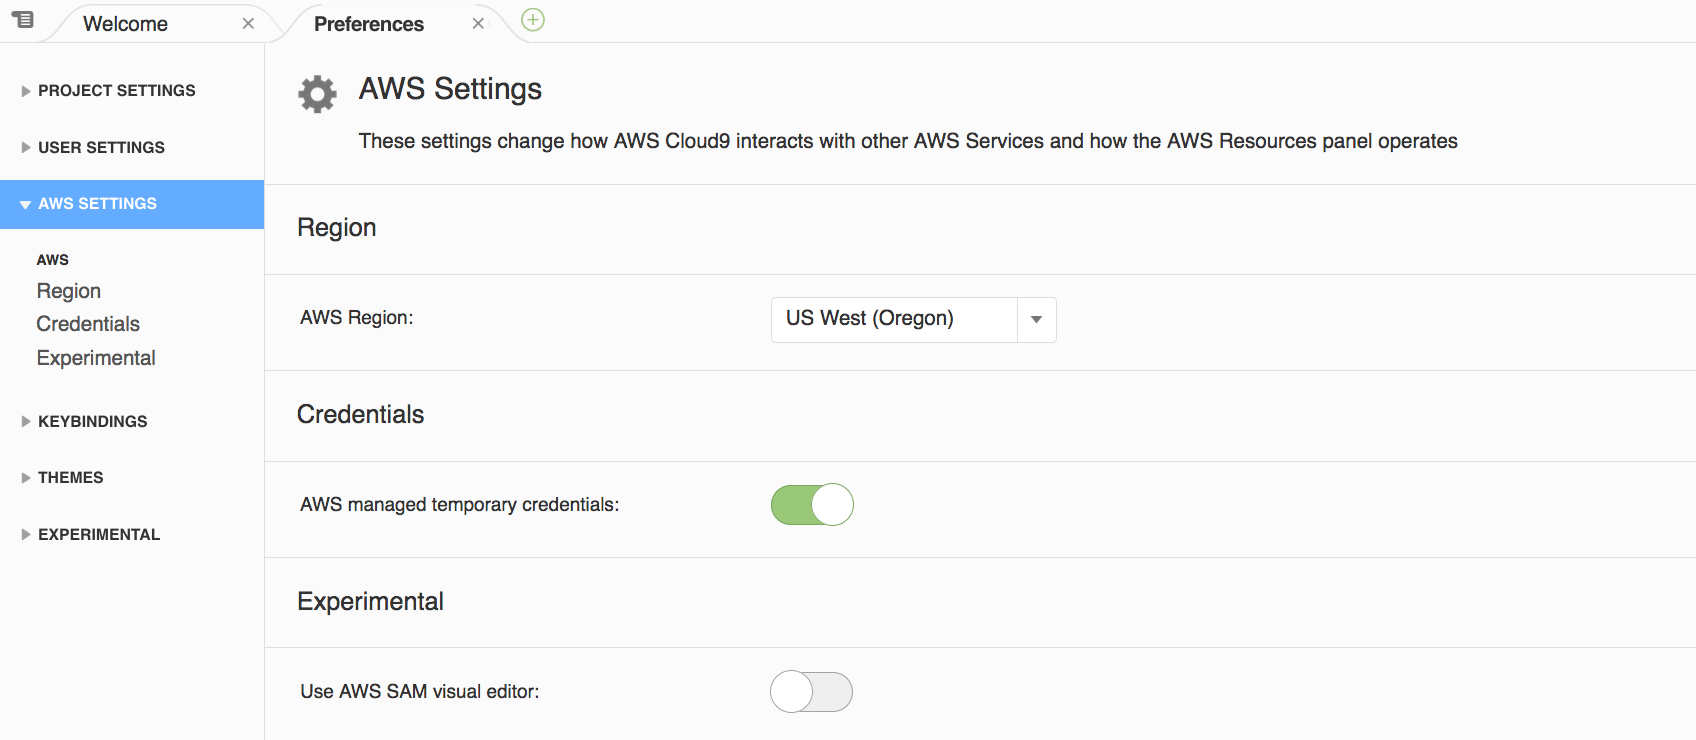 _images/preferences-aws_settings.png